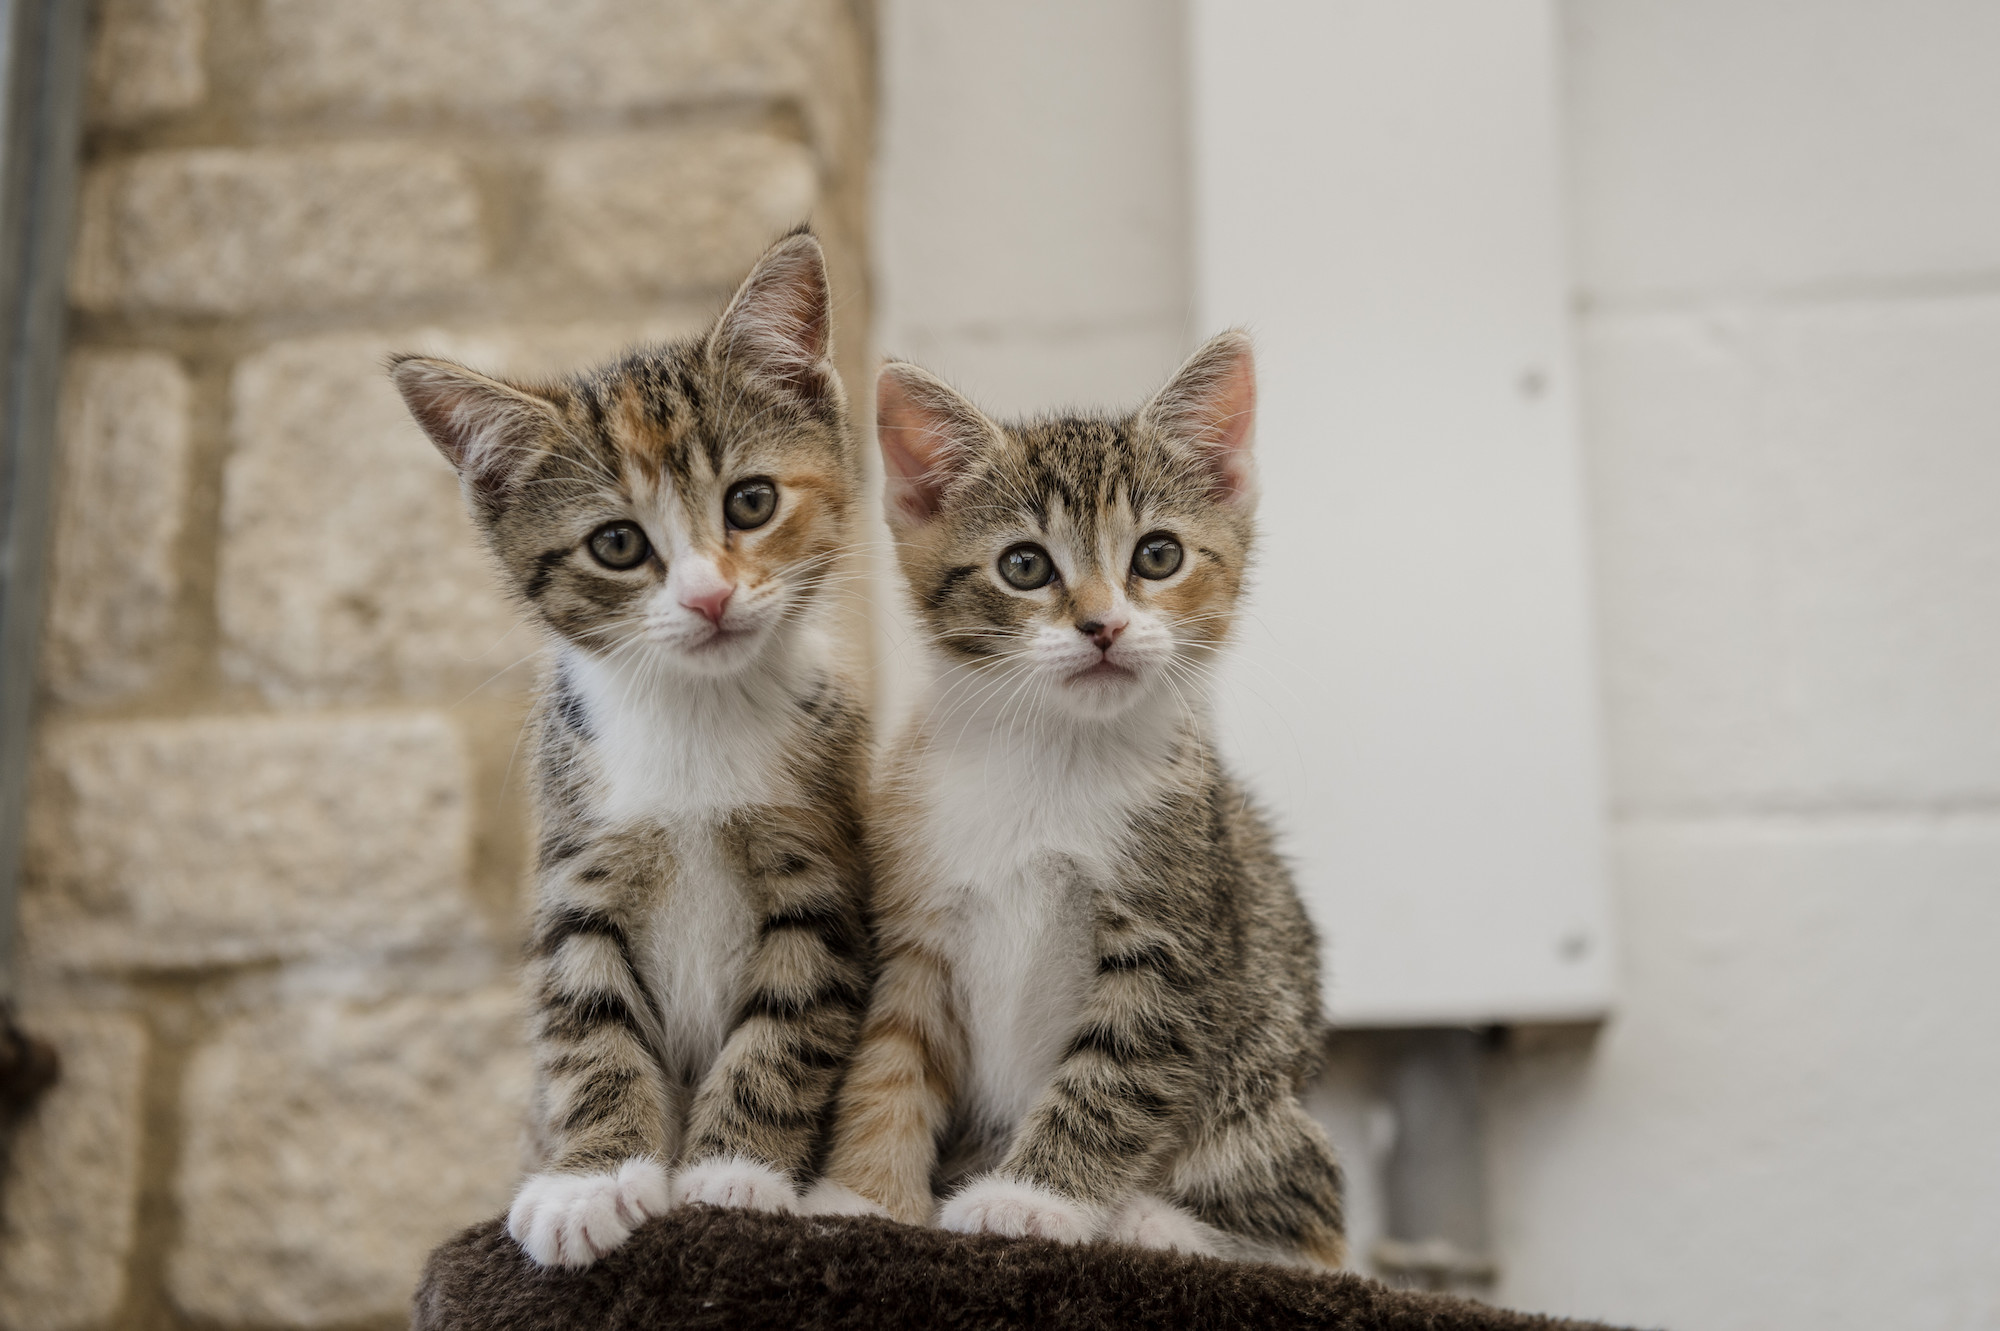 Kittens Crumpet, Croissant and Muffin from Burford rehoming centre